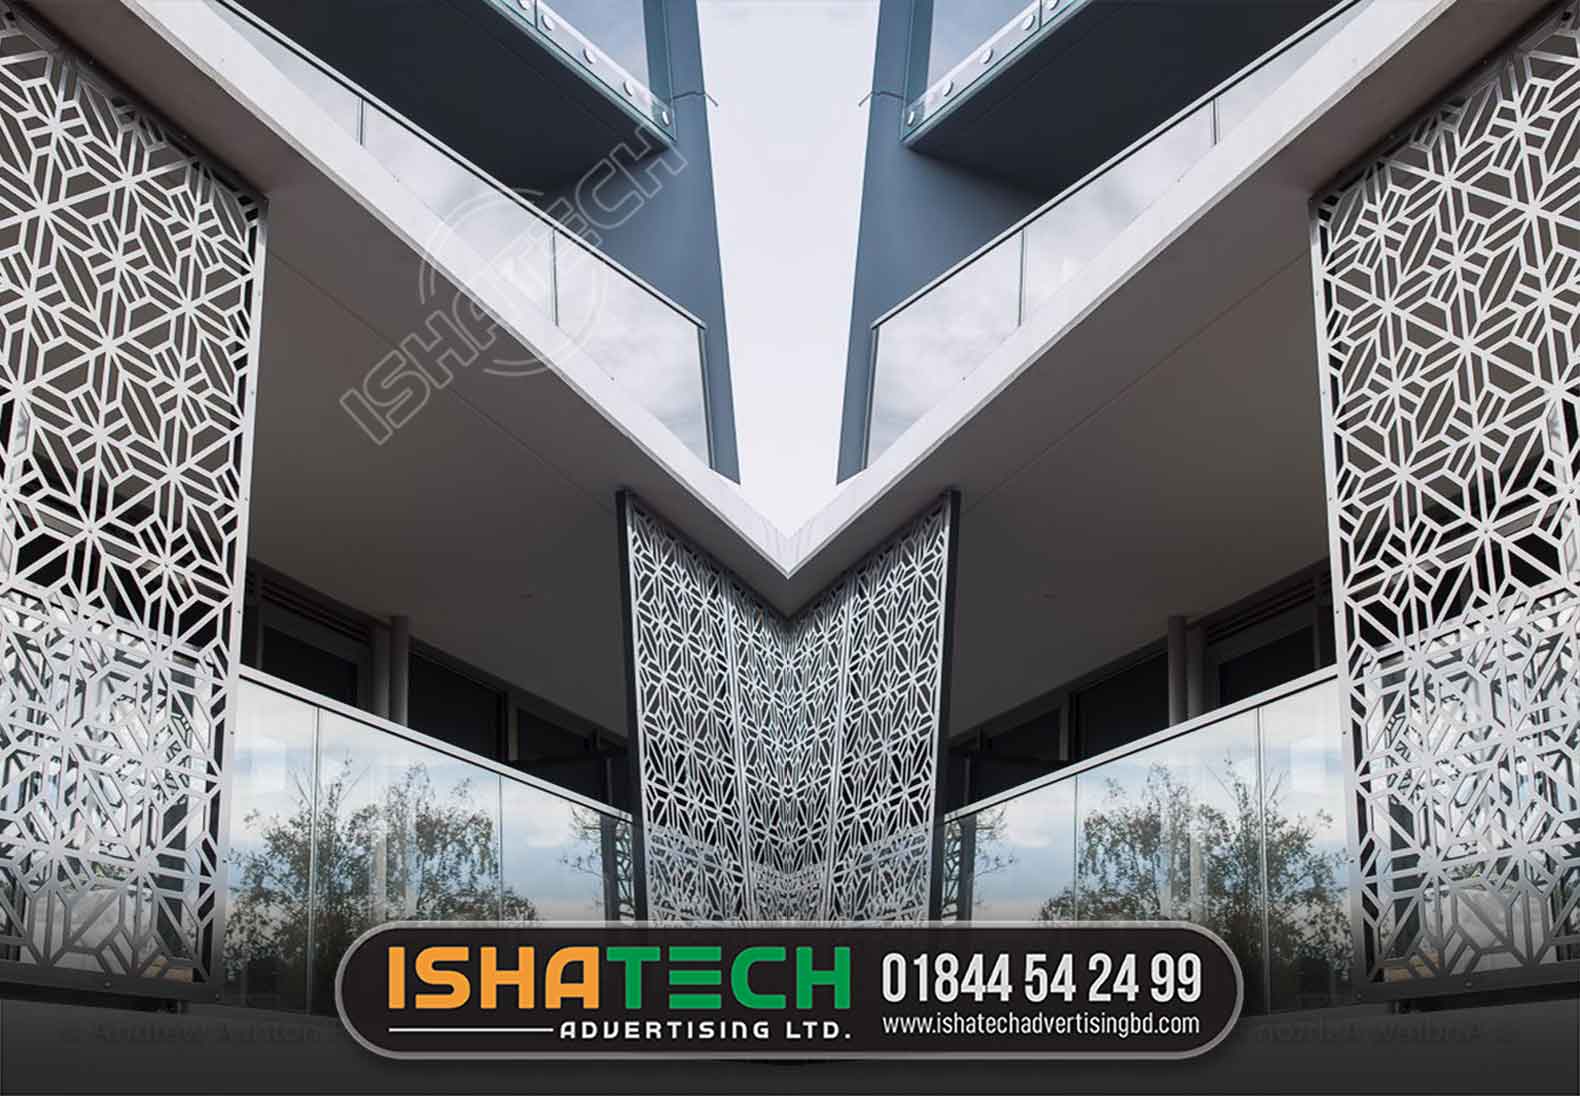 cnc router cutting and laser cutting, laser engraving, acrylic laser cutting. ‎CNC Architectural Cutting · ‎Aluminium CNC Cutting · ‎2D & 3D Logo Cutting.